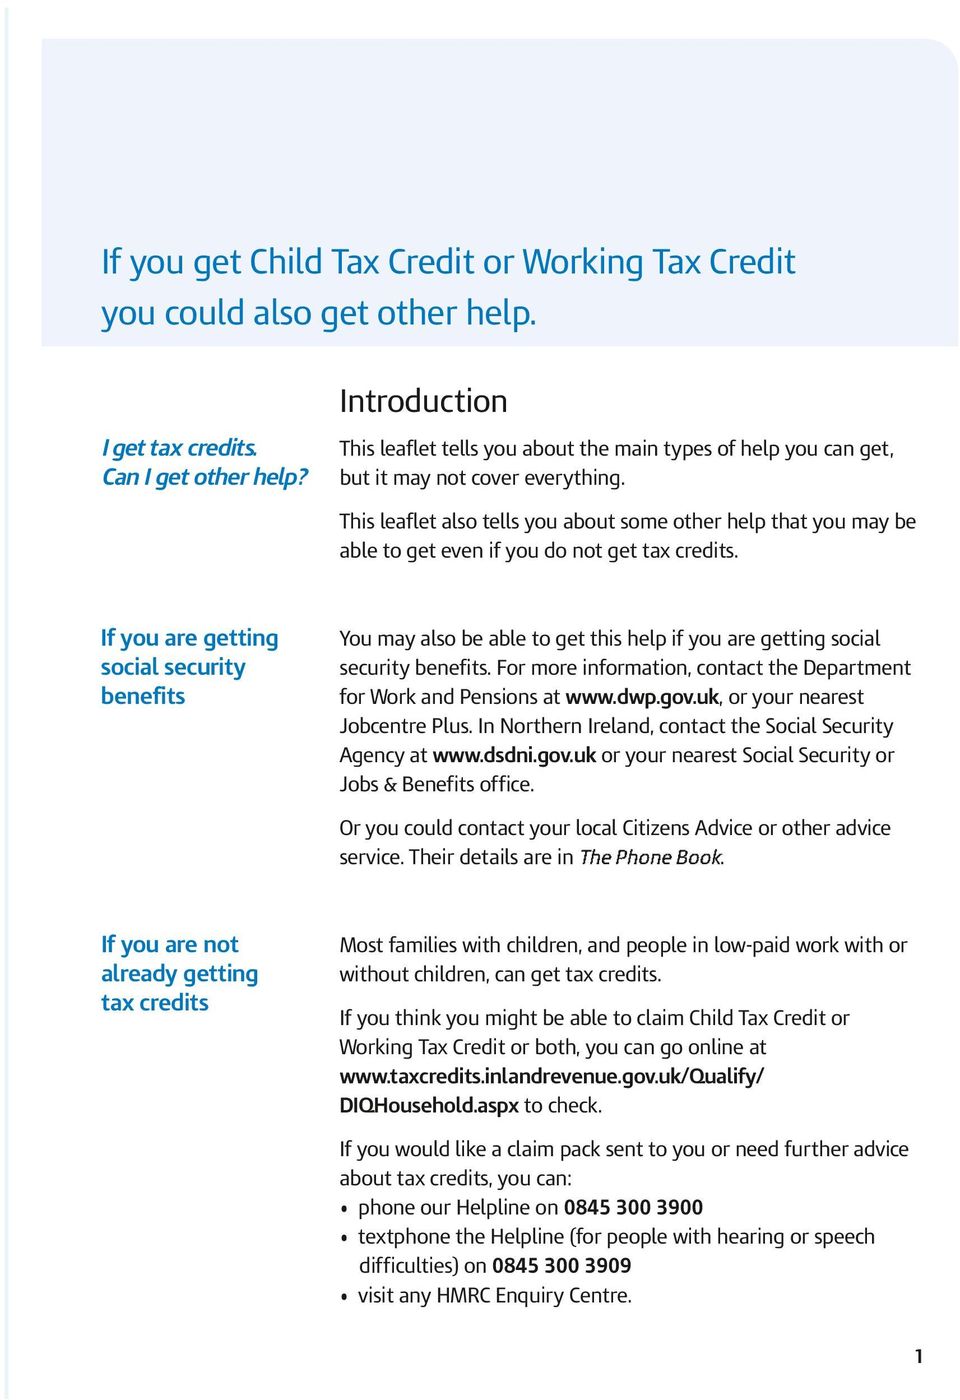 This leaflet also tells you about some other help that you may be able to get even if you do not get tax credits.